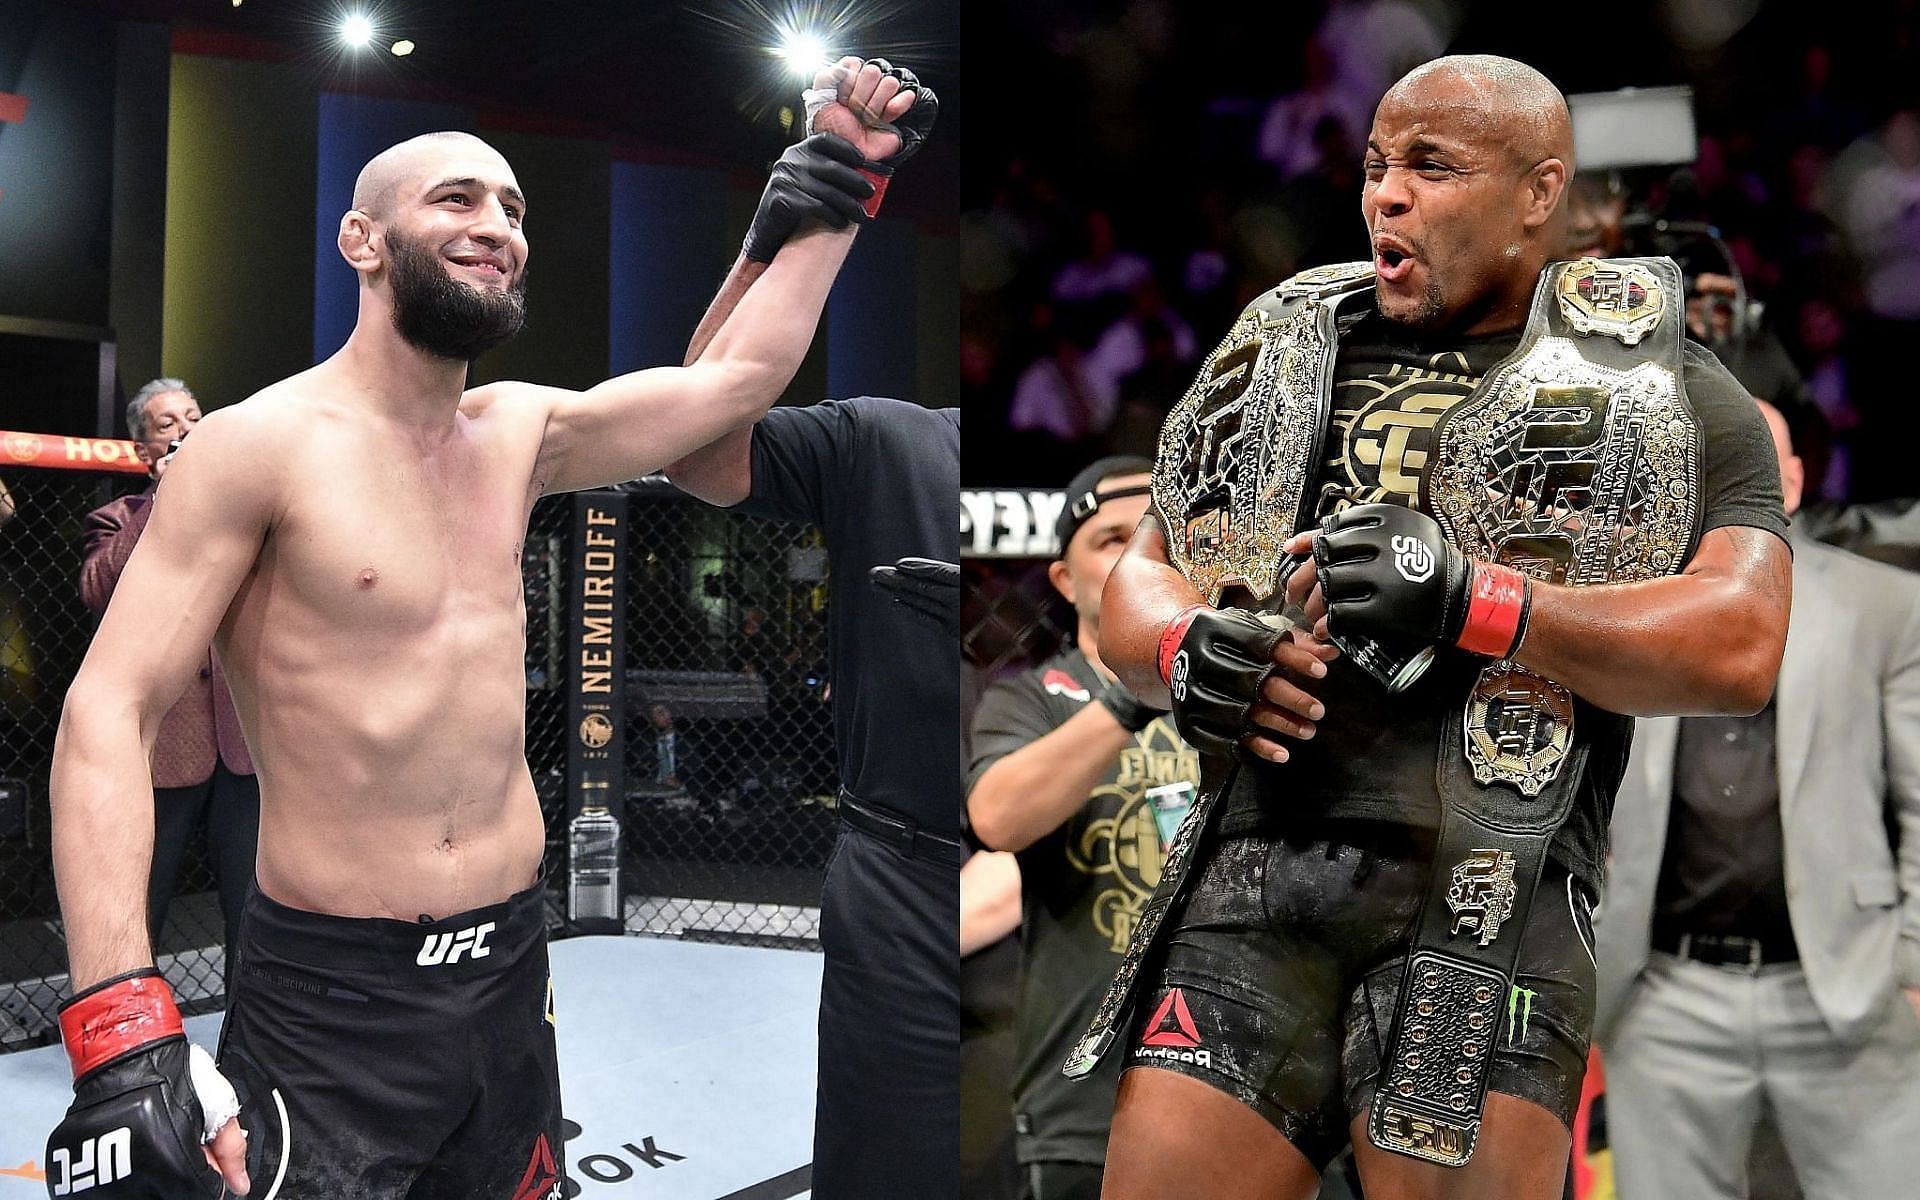 Khamzat Chimaev recently called out Daniel Cormier for a wrestling match